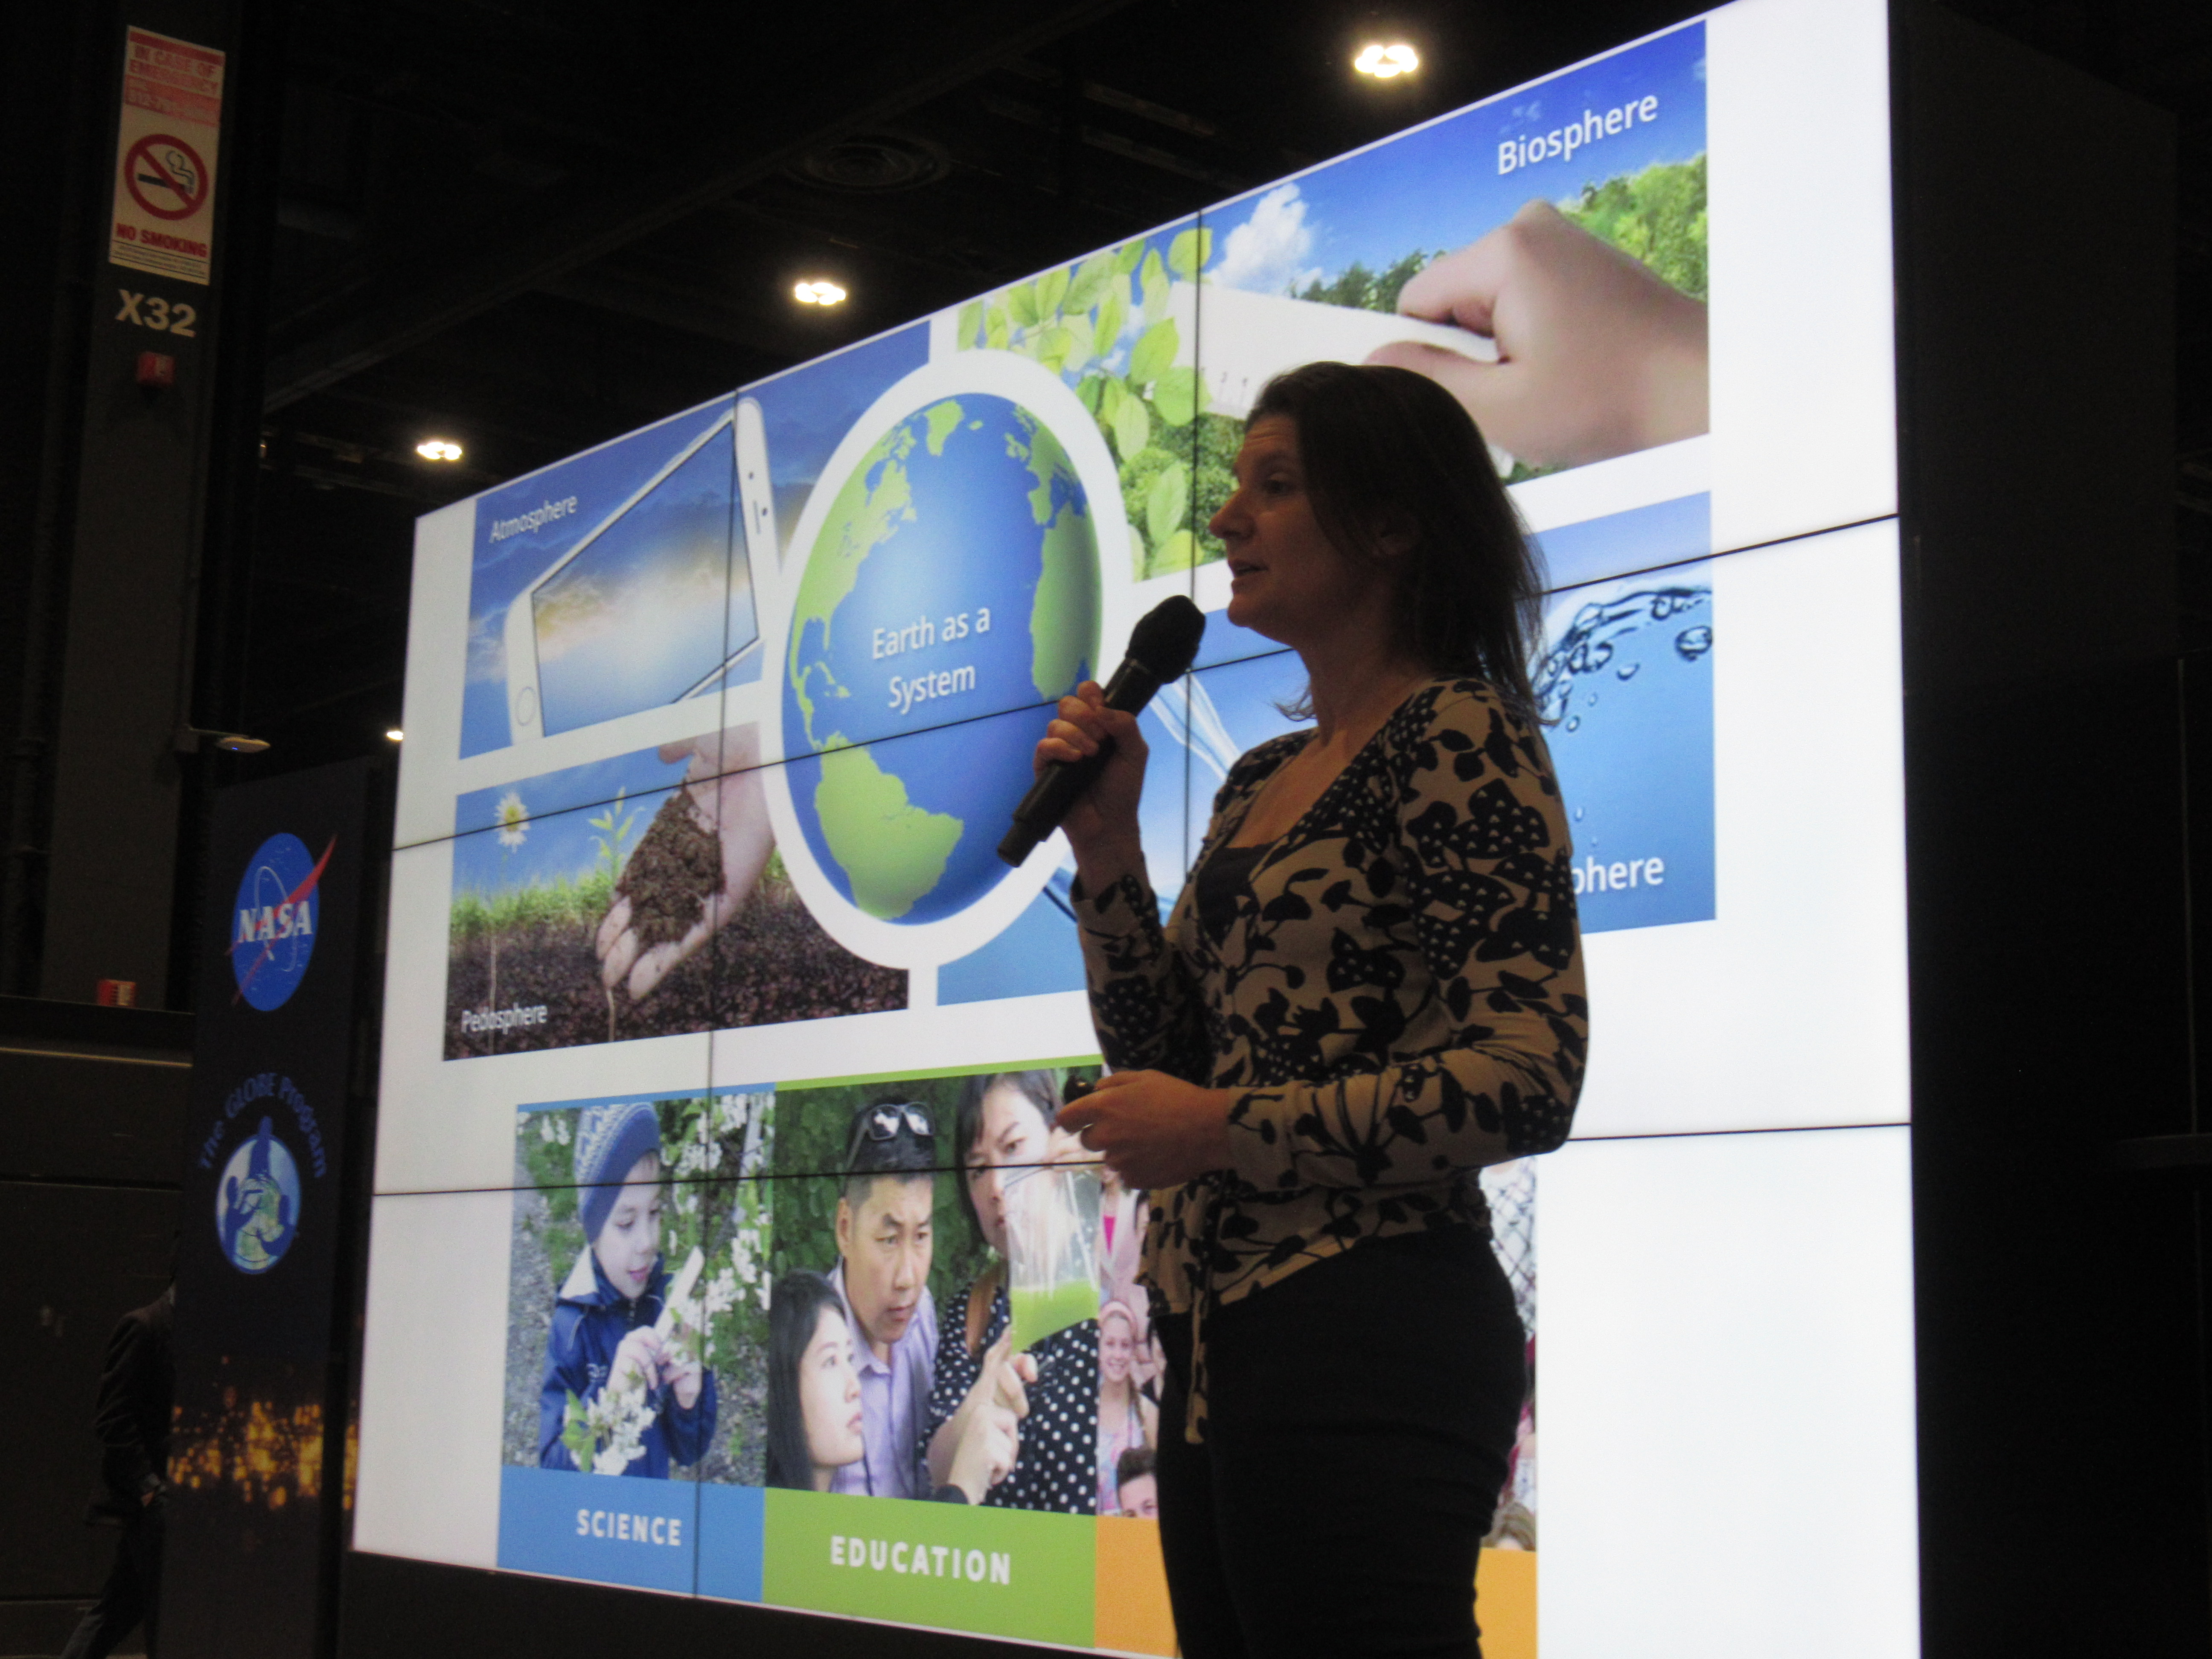 A woman with a microphone presents in front of multiple television screens. On the screen is an Earth as a System diagram with the four spheres of GLOBE protocols, atmosphere, biosphere, pedosphere and hydrosphere.